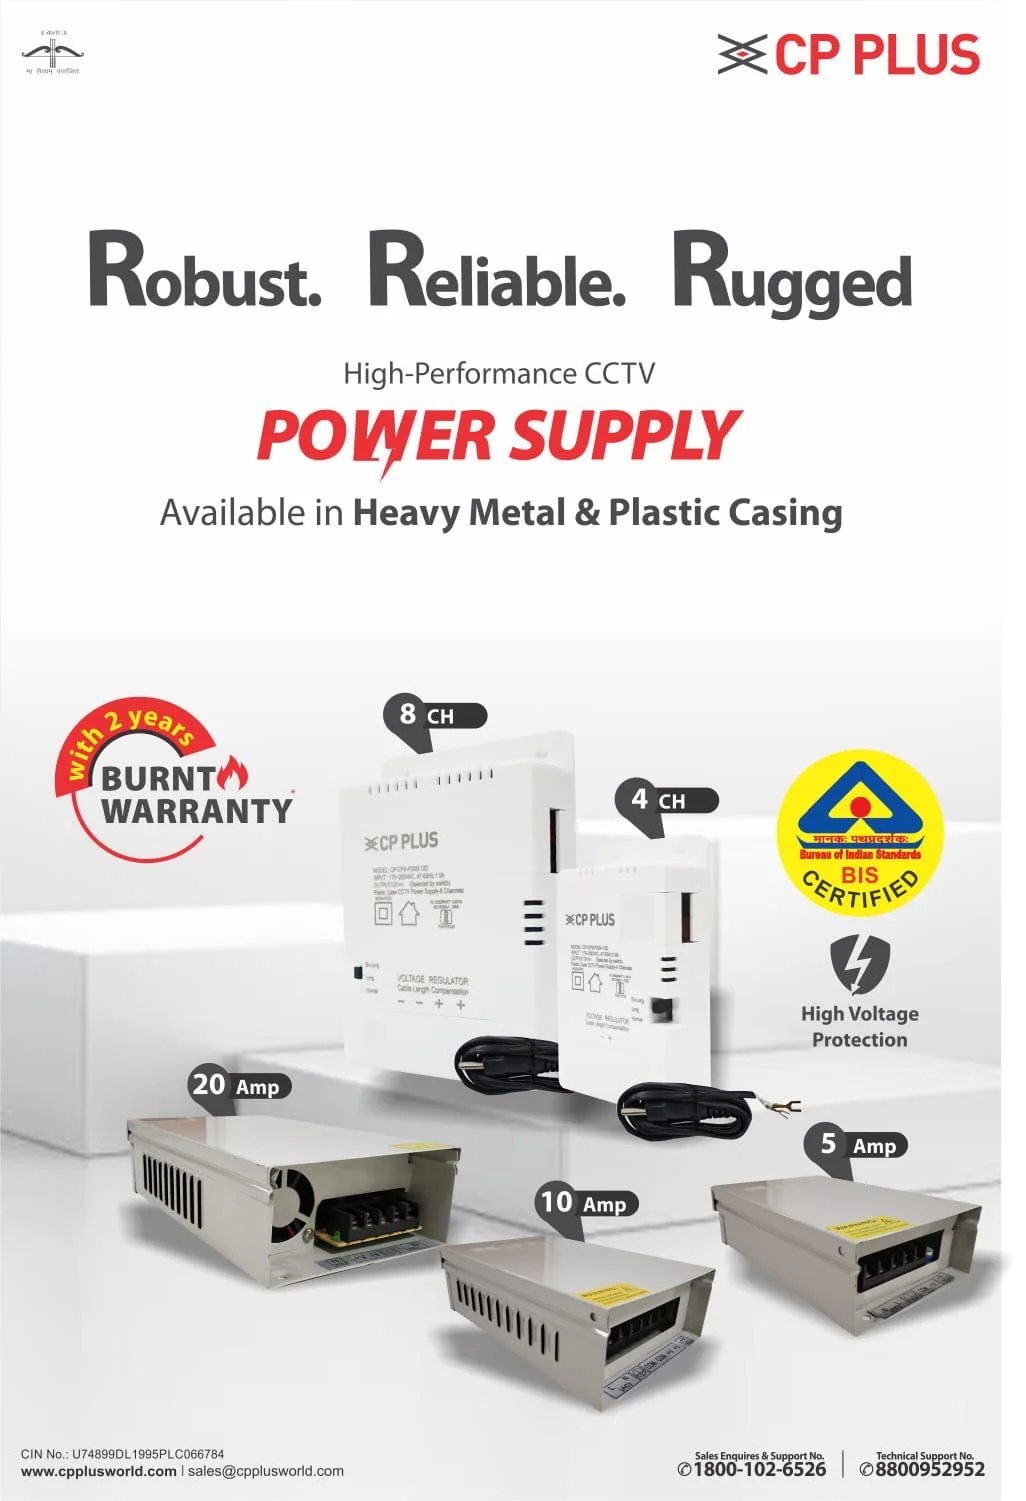 Robust - Reliable - Rugged - High Performance CP PLUS CCTV Power Supply.